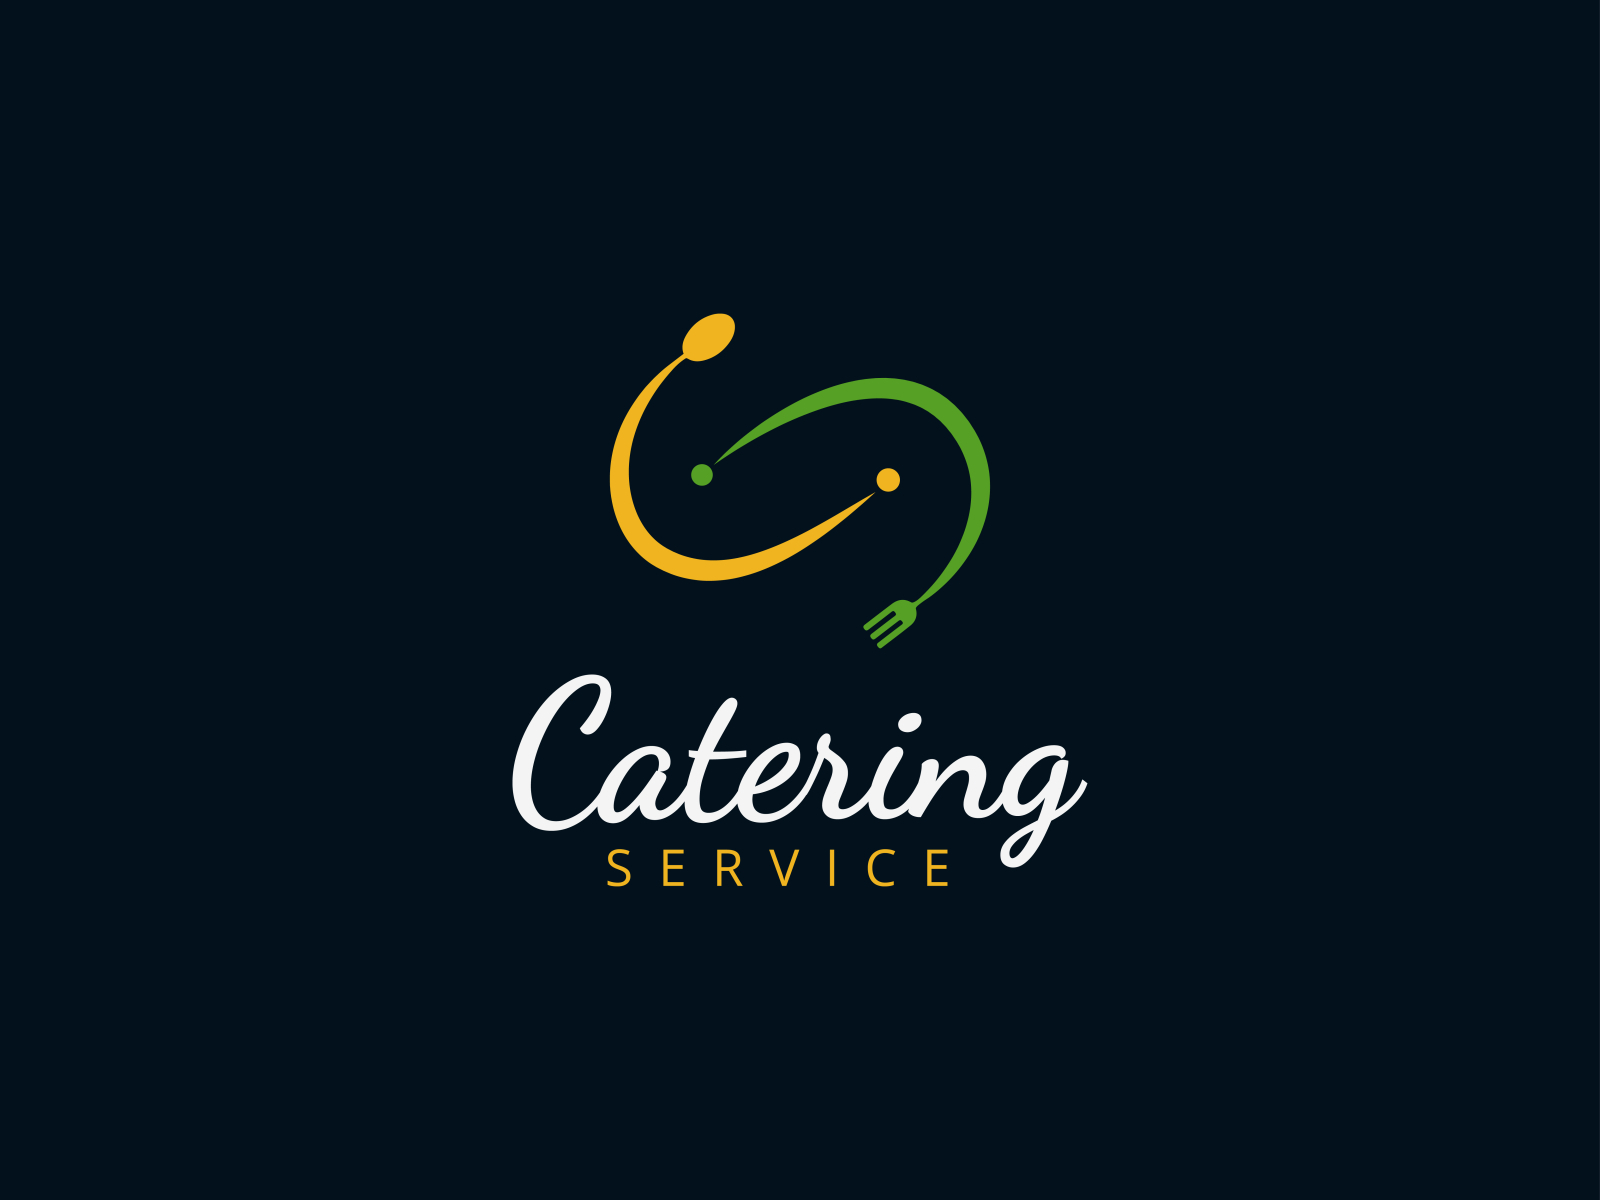 Catering Service Logo by Arup Baidya on Dribbble